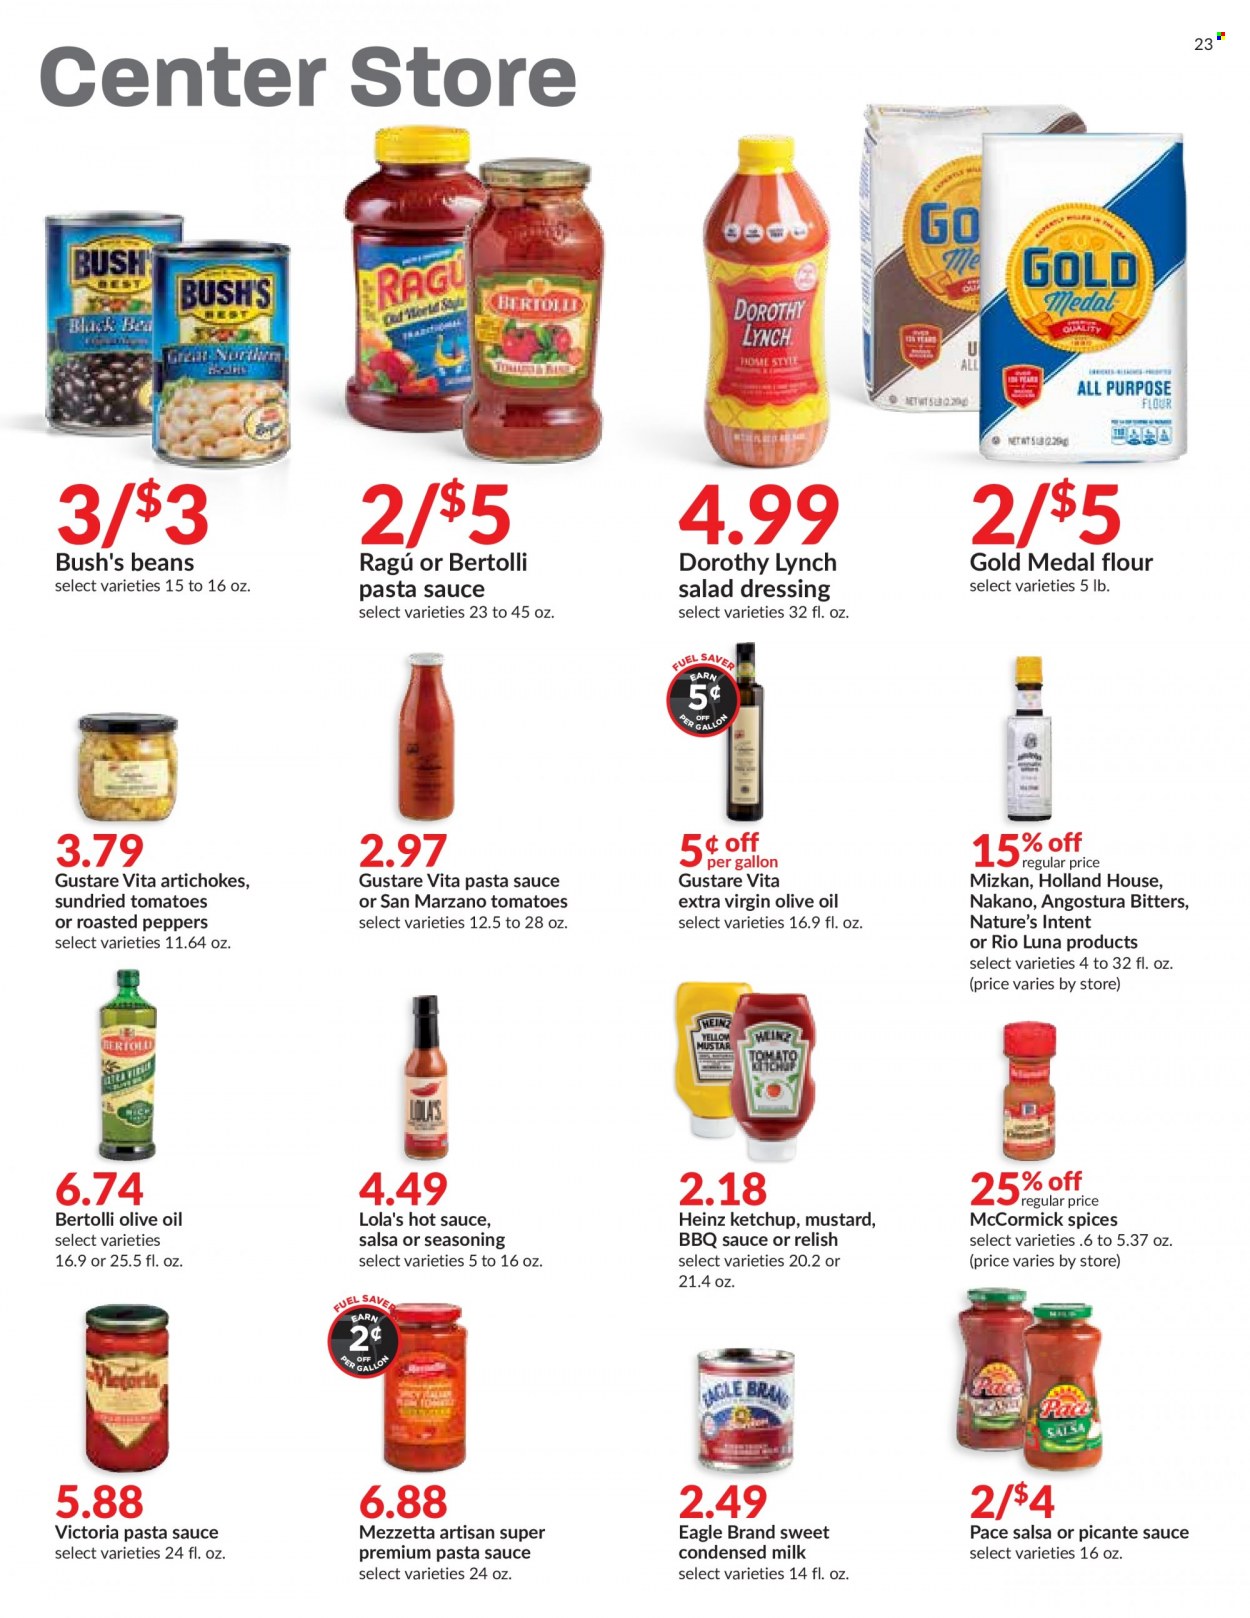 thumbnail - Hy-Vee Flyer - 11/17/2021 - 11/25/2021 - Sales products - artichoke, beans, pasta sauce, sauce, Bertolli, condensed milk, all purpose flour, flour, dried tomatoes, Heinz, relish, spice, BBQ sauce, mustard, salad dressing, hot sauce, ketchup, dressing, salsa, ragu, extra virgin olive oil, olive oil, oil, pan. Page 23.